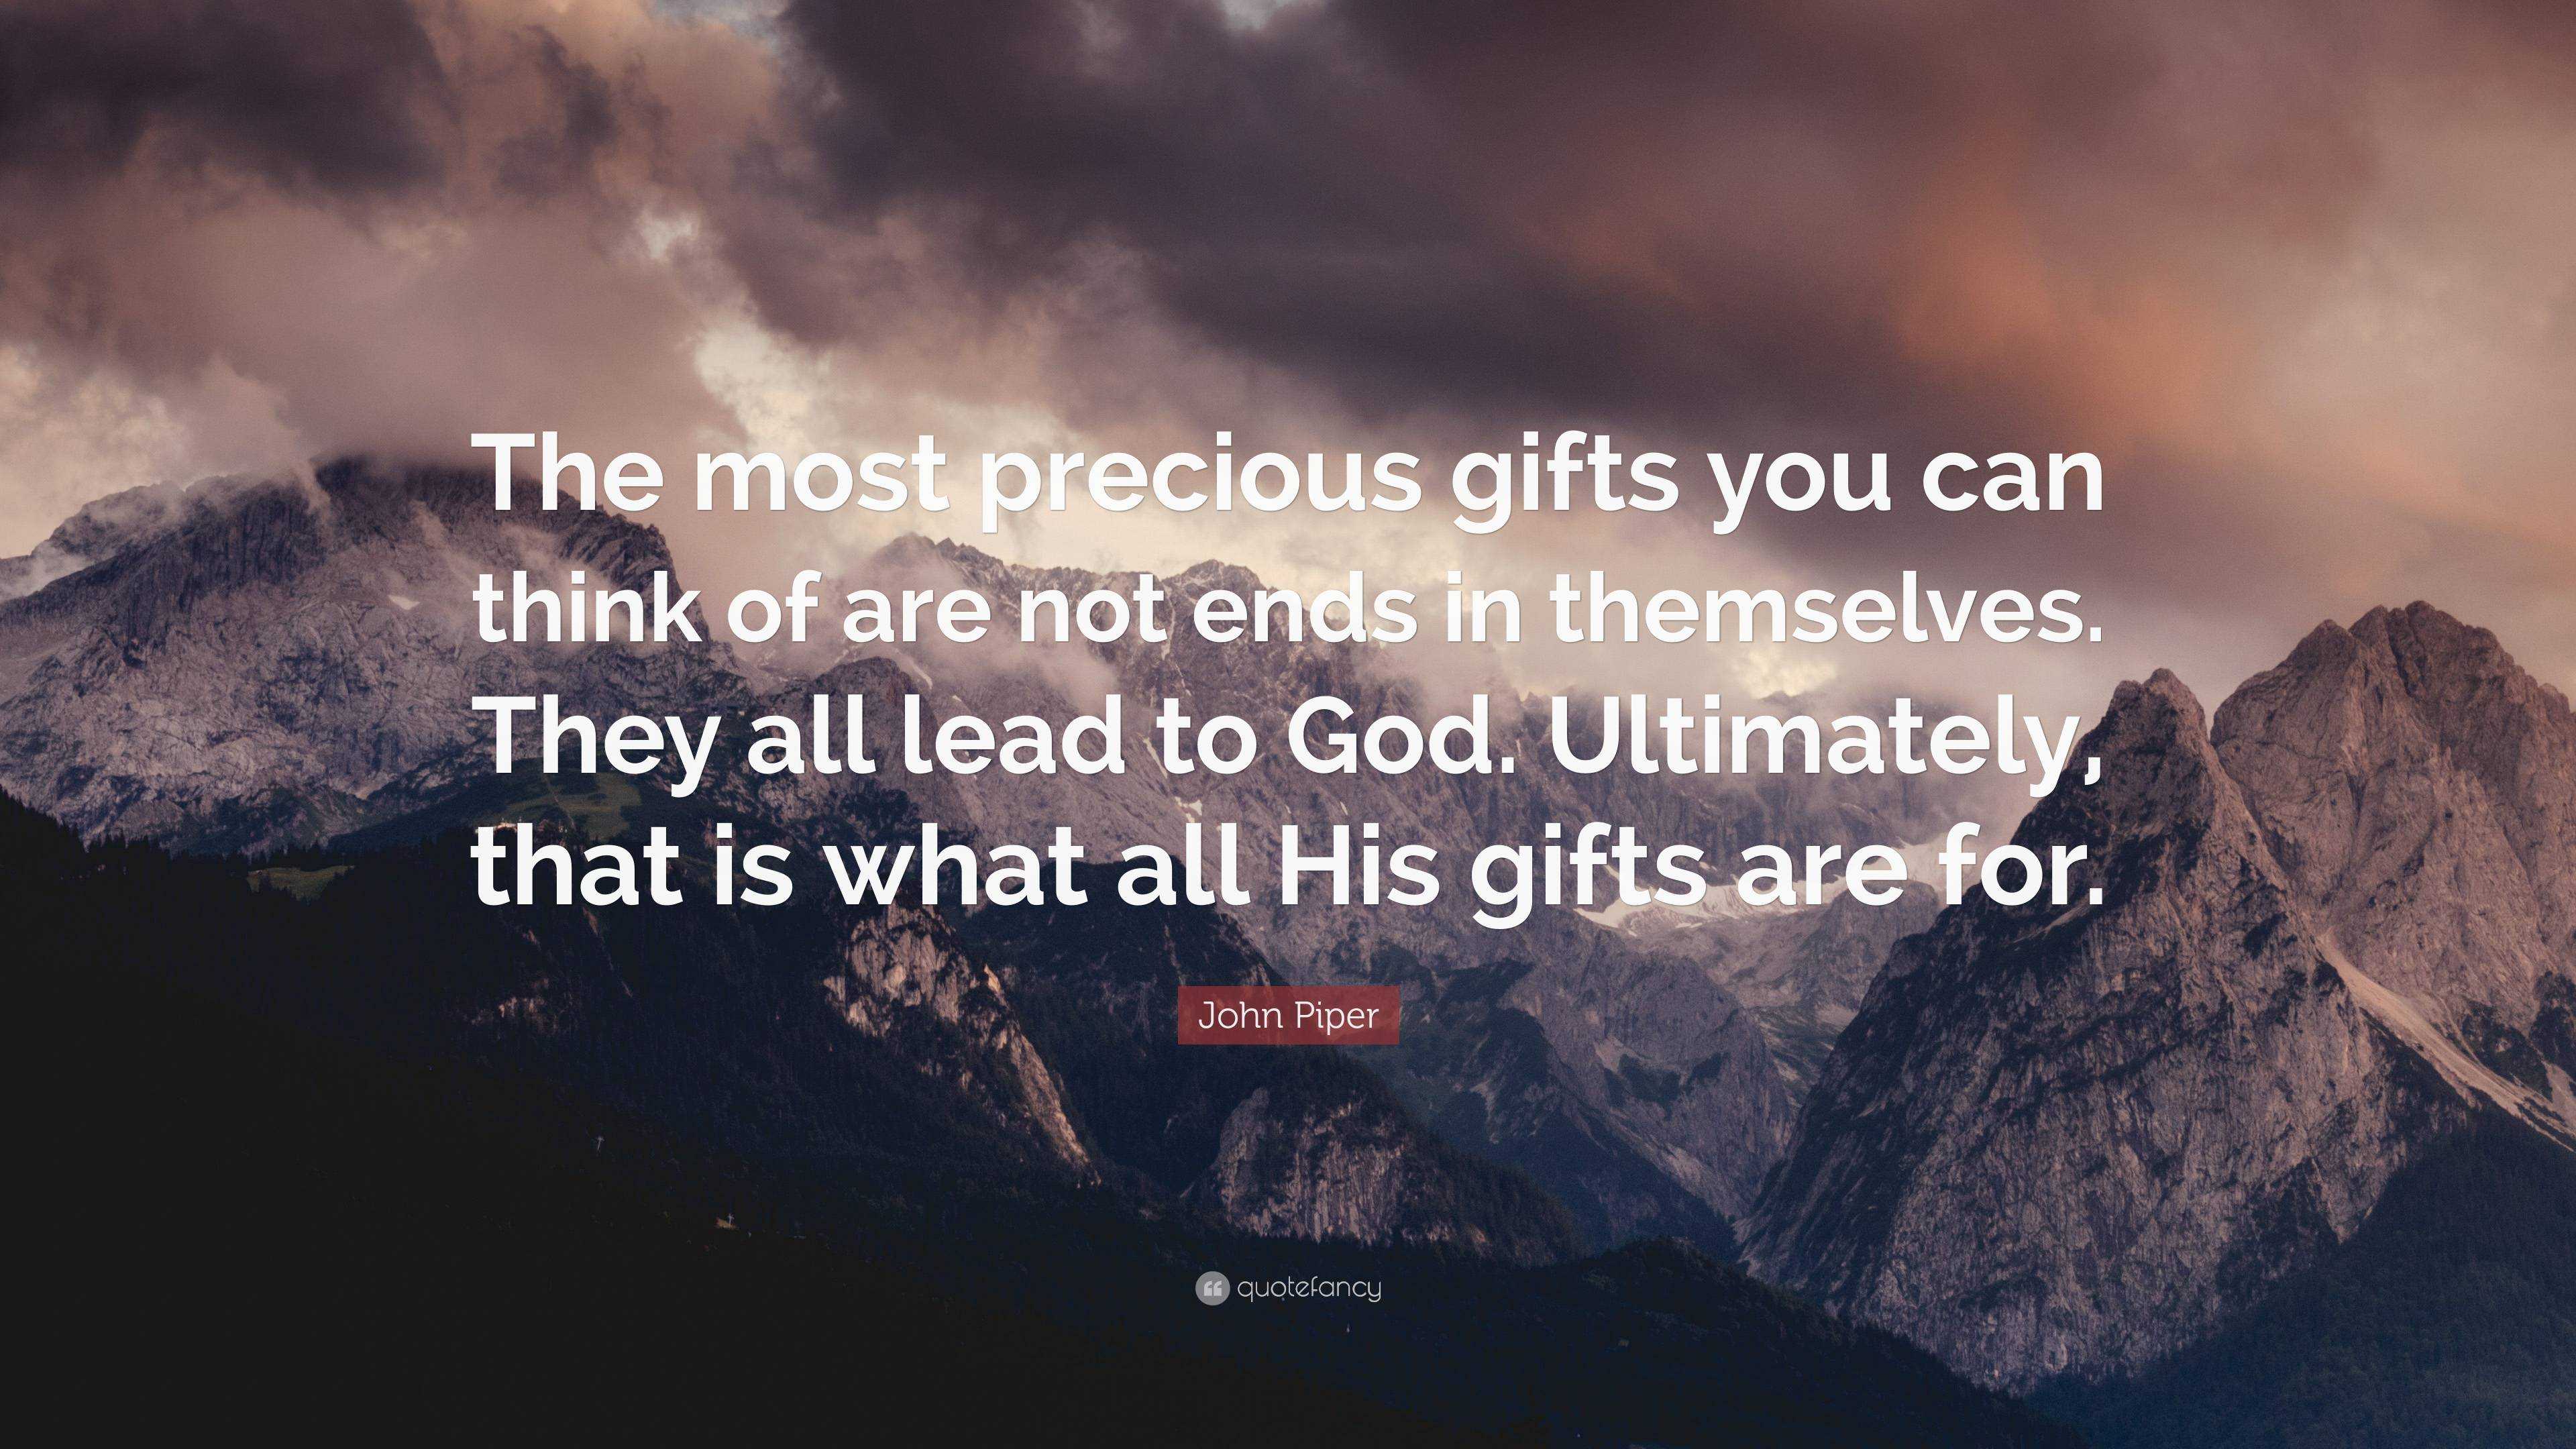 You Are Our Precious Gift From God | Have A Blessed, Happy, Joyous, And  Wonderful Mother's Day To All Mothers, Grandmothers, God Mothers, Mother  Figures, Mentoring Mothers, Soon To Be... | By